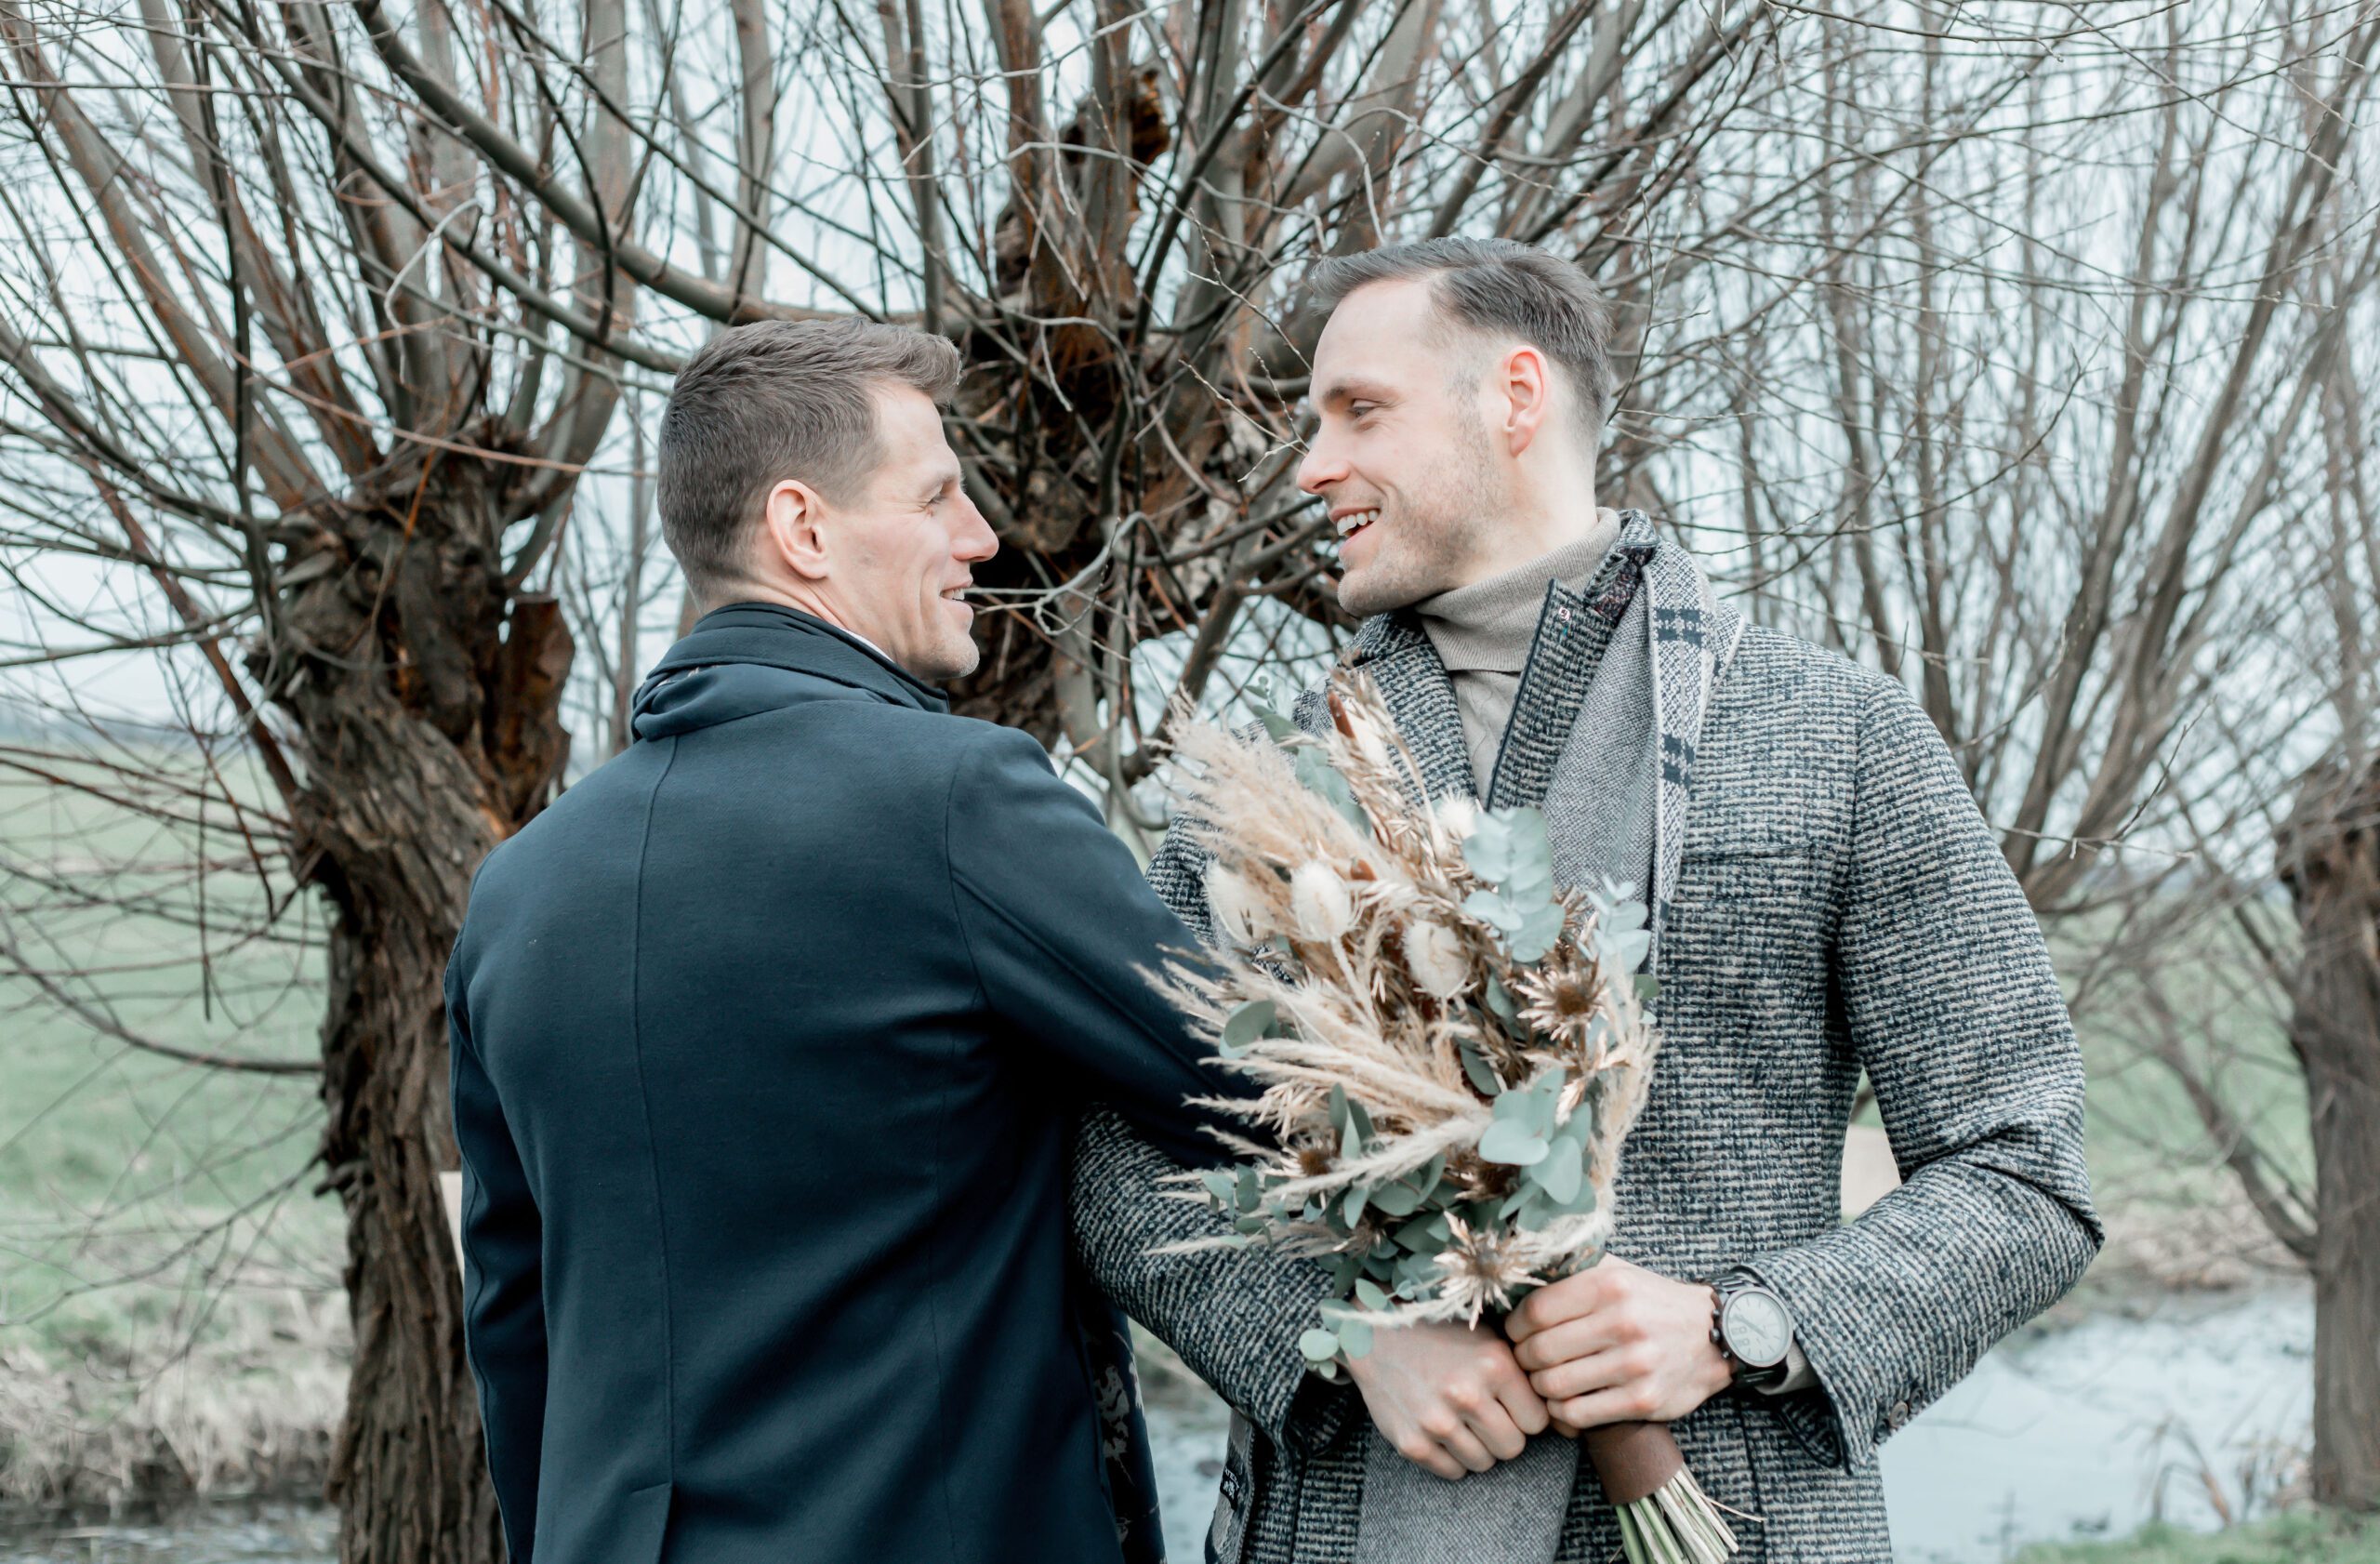  romantic places to elope for gay couples